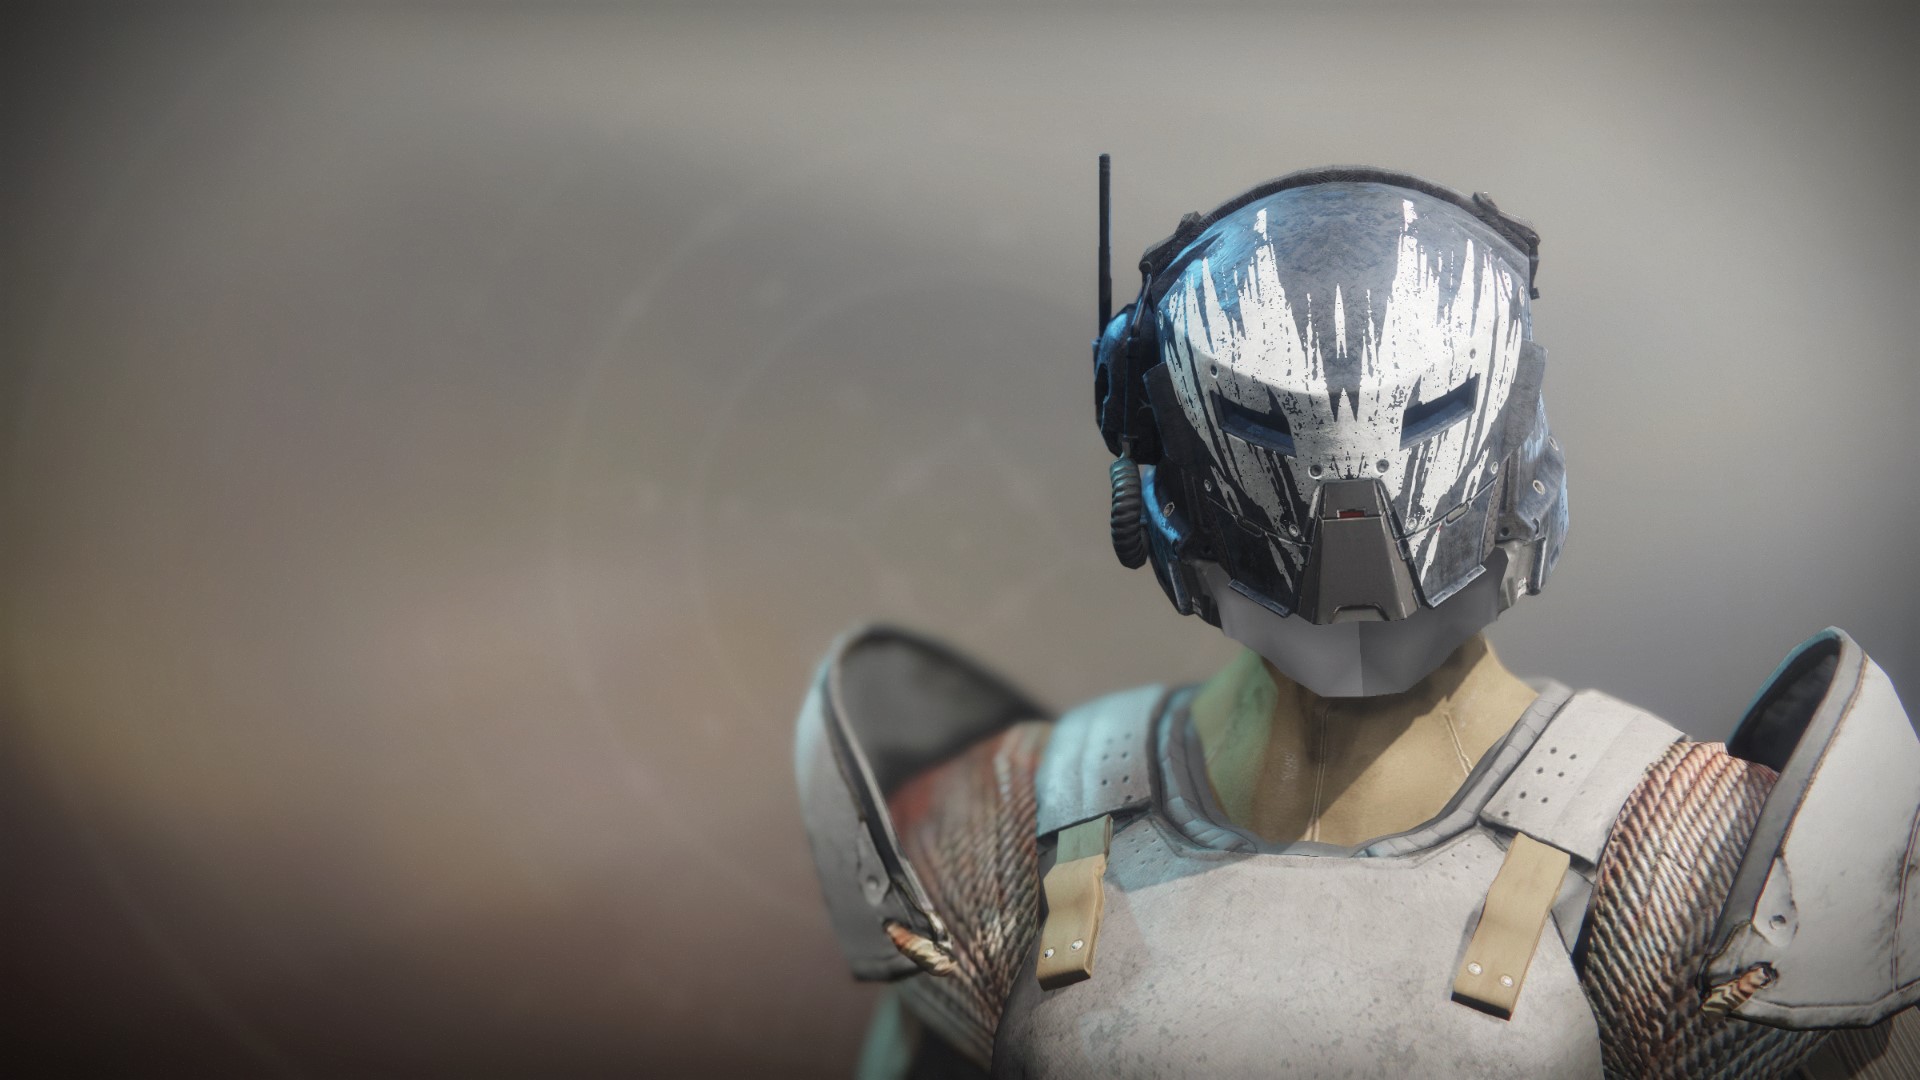 An in-game render of the Extinction Orbit Ornament.